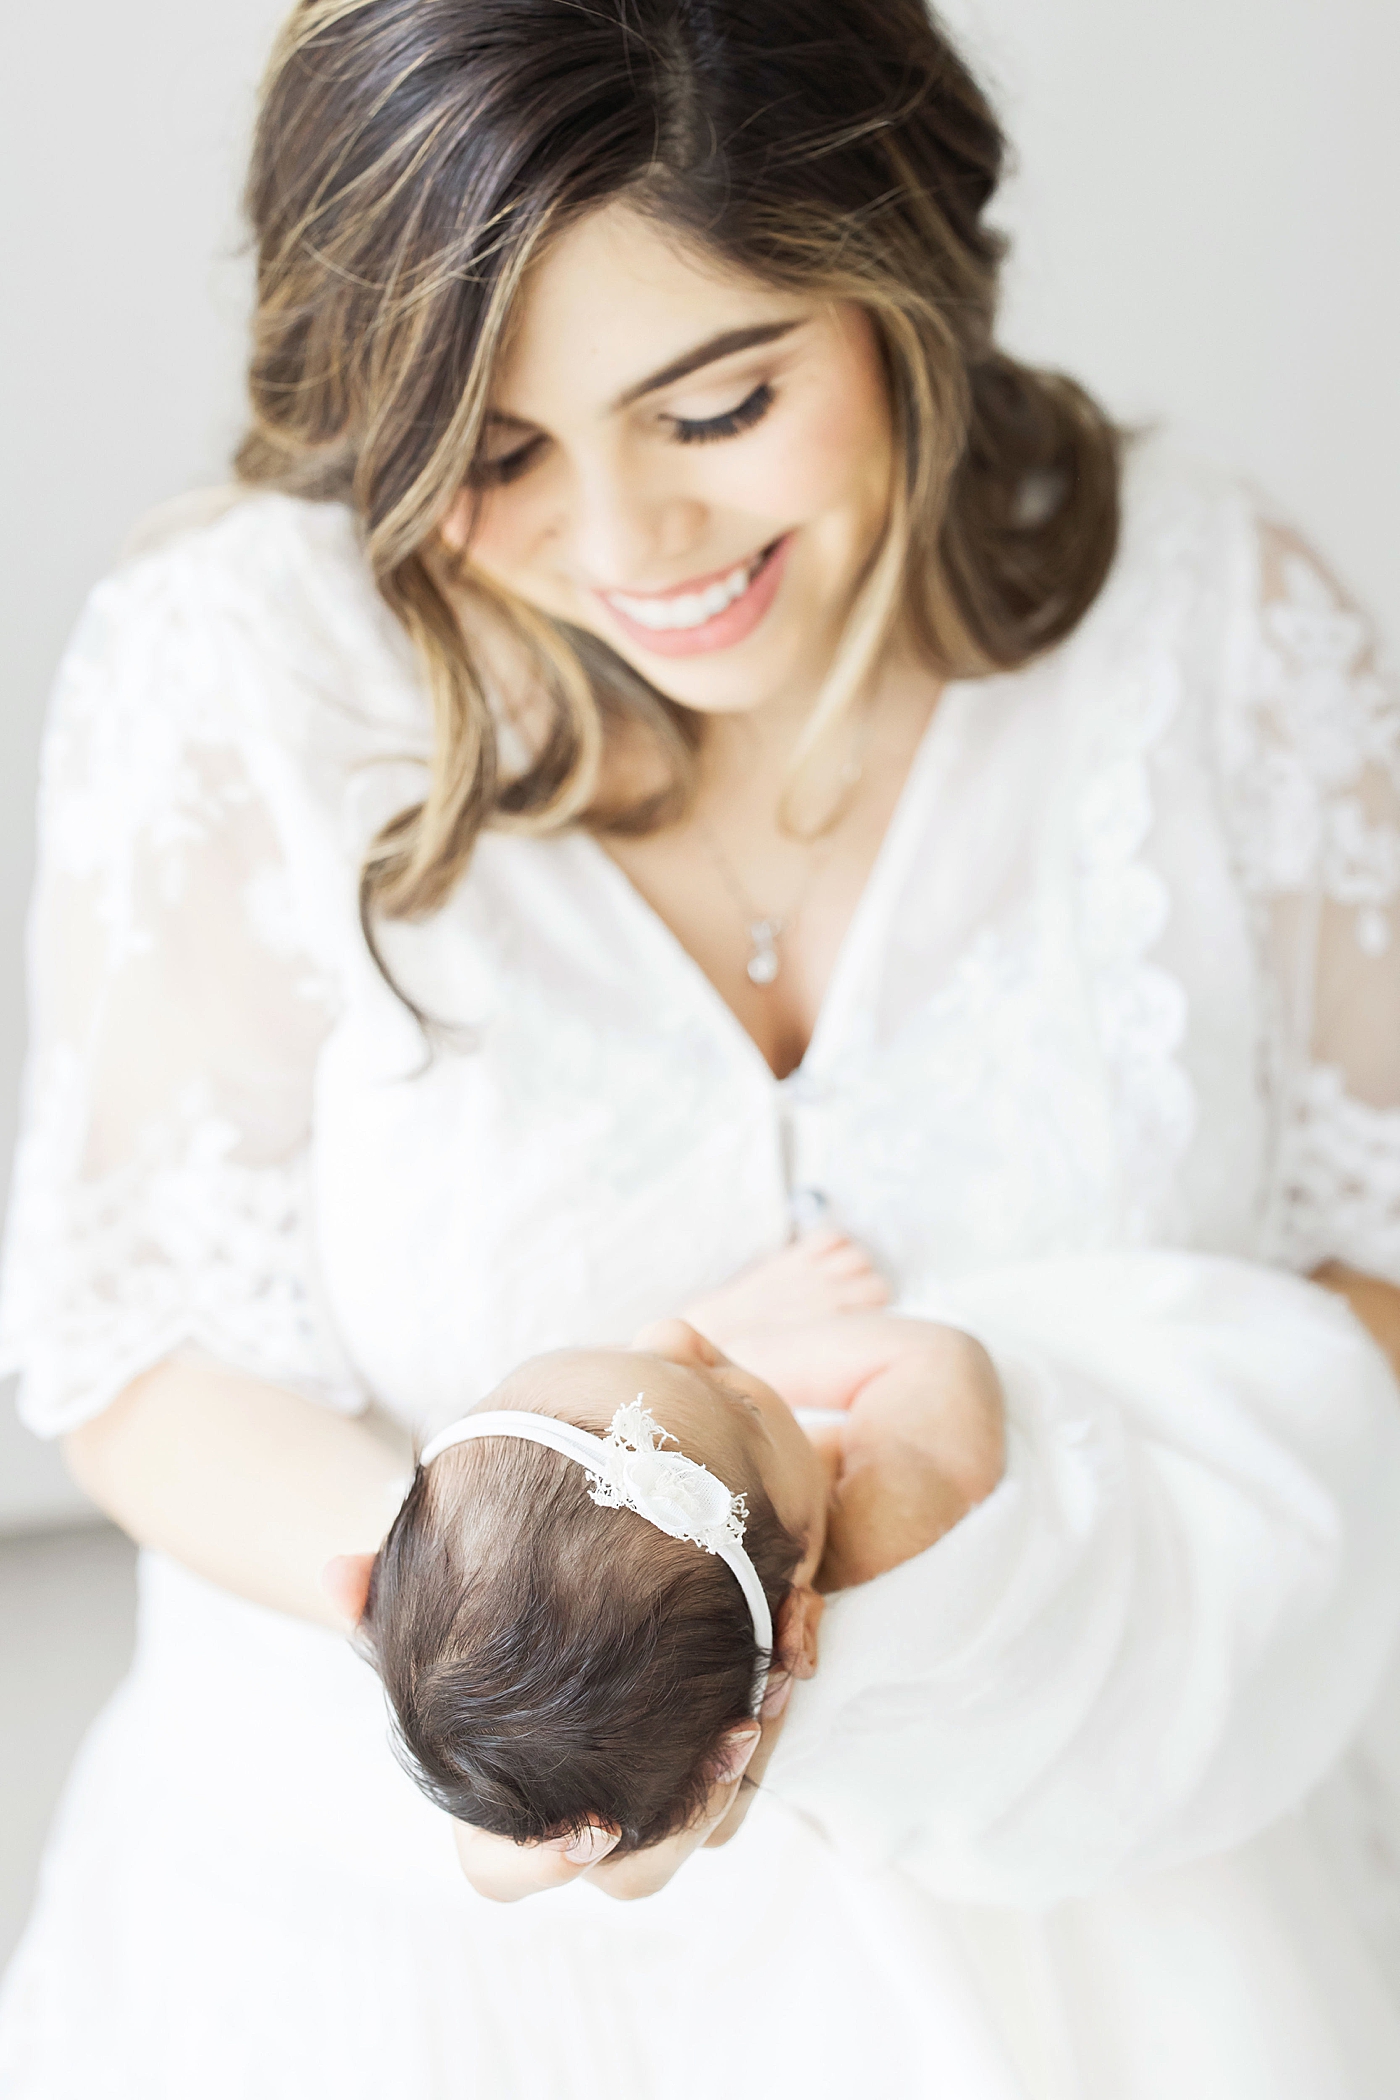 Mom with newborn baby girl. Photo by Fresh Light Photography.